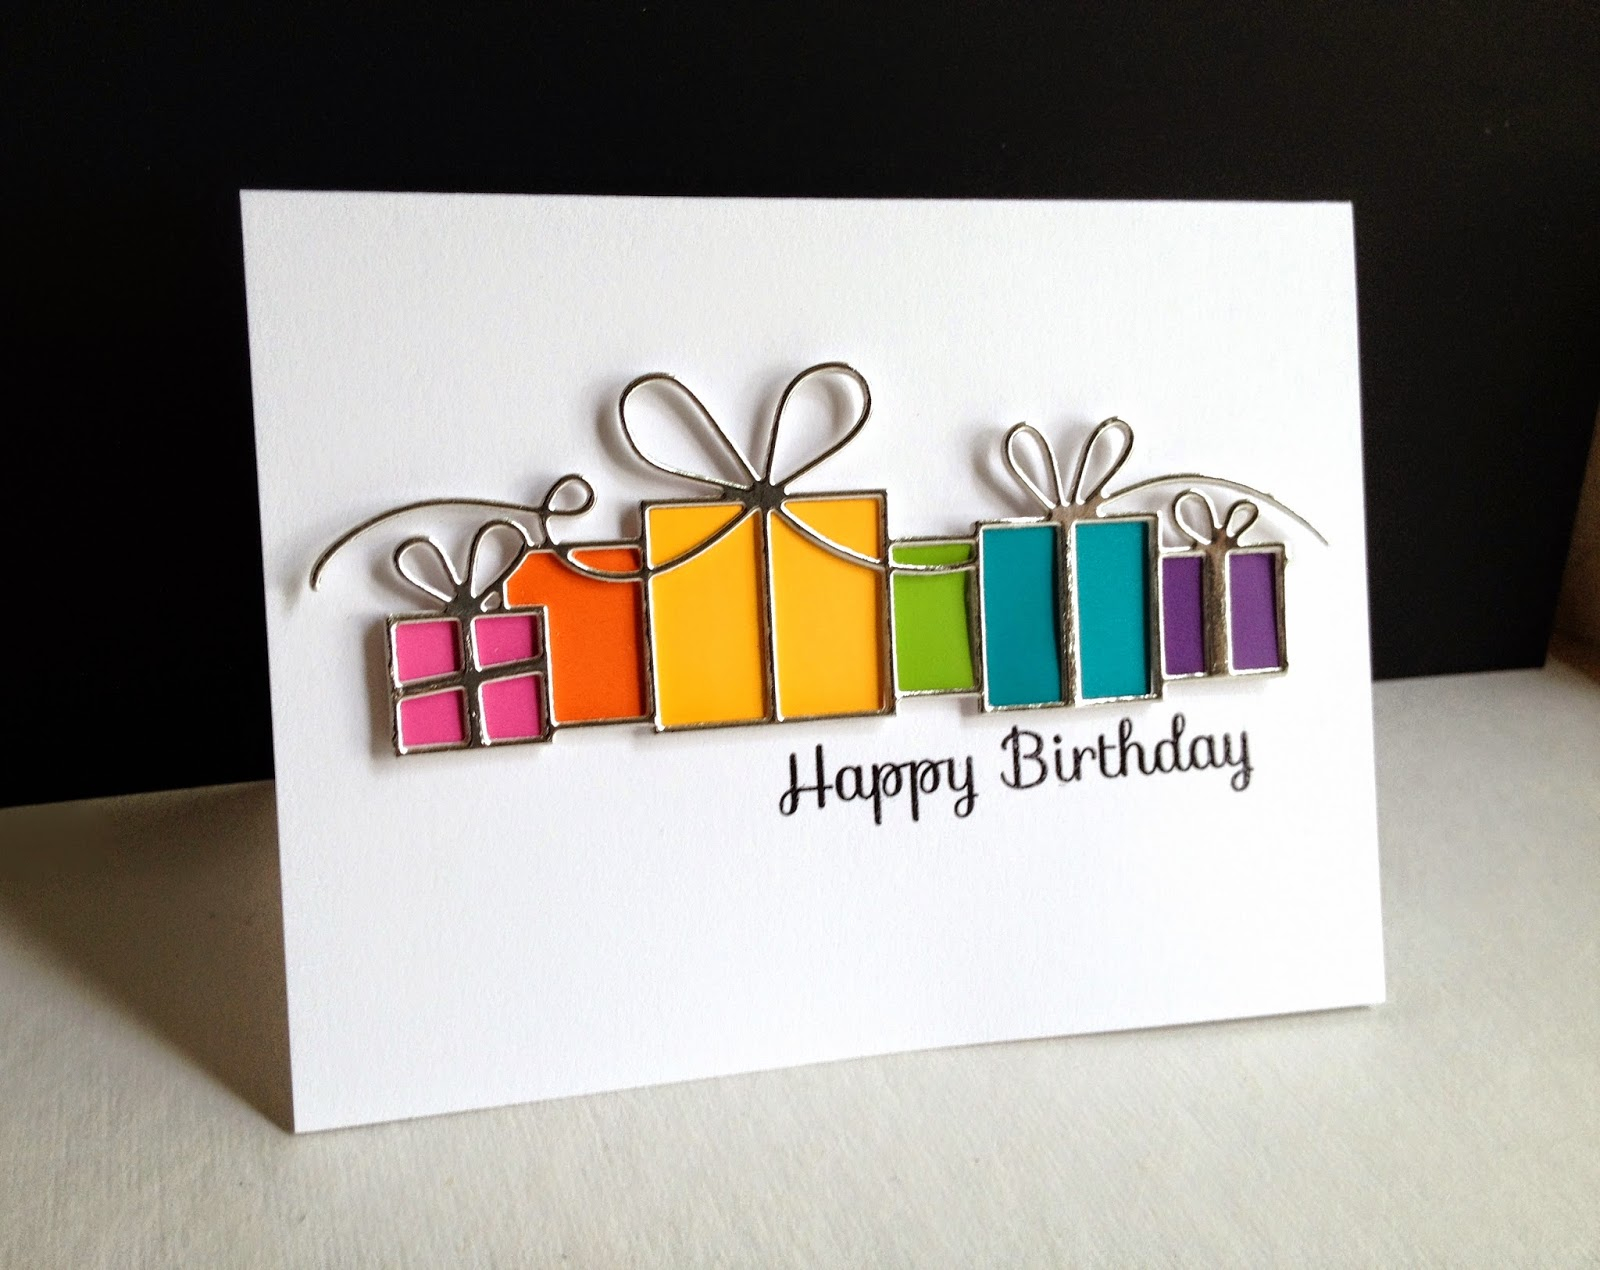 Card Design Ideas For Birthdays Birthday Games Themes Favors And Invites Ideas 2019 Thousands Of